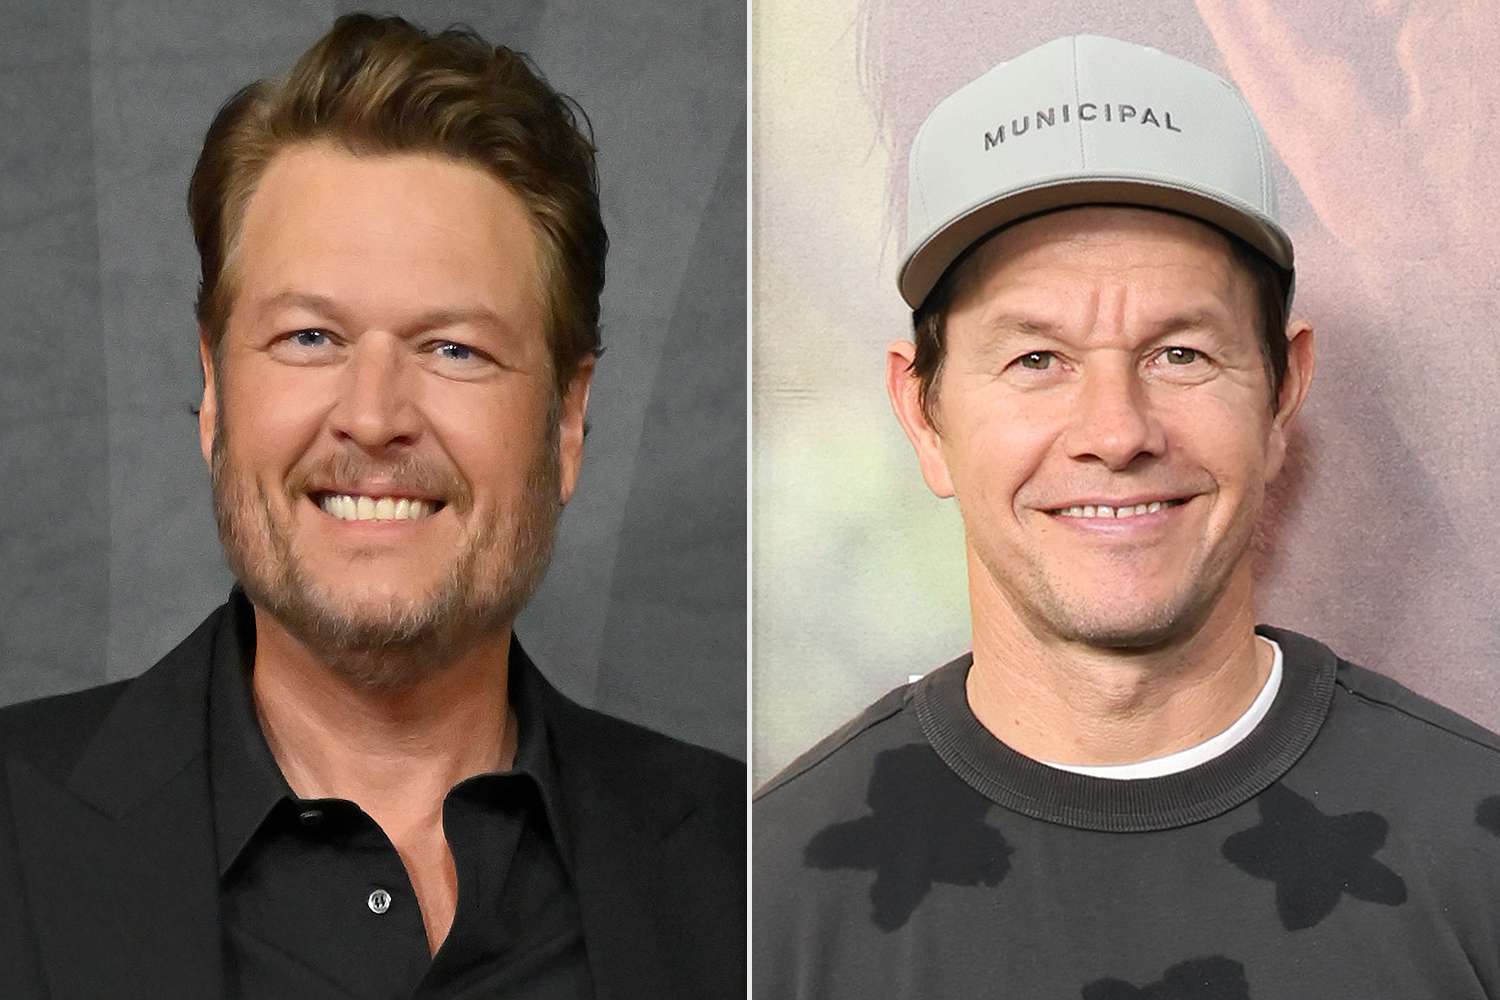 Blake Shelton Spends $40K for Walk-On Movie Role with Mark Wahlberg, Jokes 'I’m a Movie Star Now'